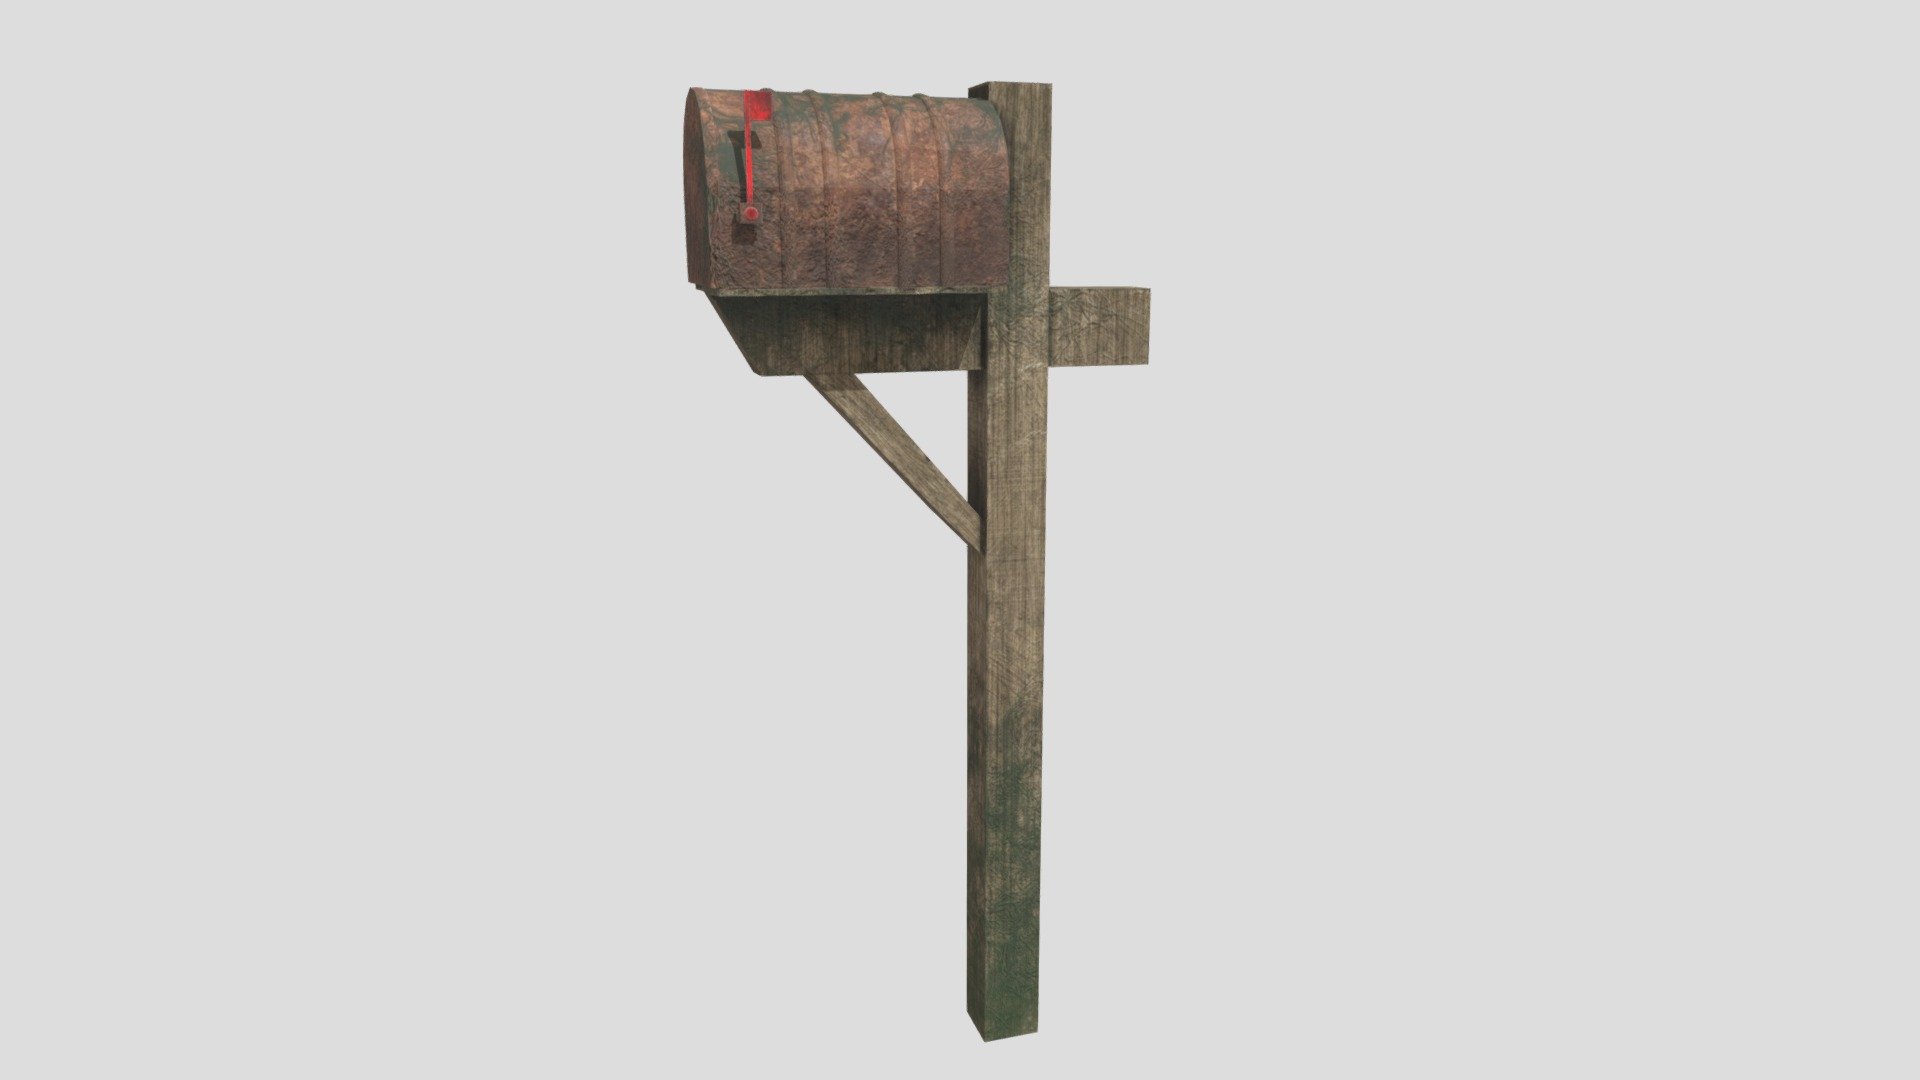 Post box

Model made out of 4 parts; wooden base, metal post box, metal post box door, flag. That way you can animate it if you wish!

Separate maps for each 2048x2048

Painted in Substance Painter 

Post box is painted to look old and rusy - Post box - Buy Royalty Free 3D model by Paubr 3d model